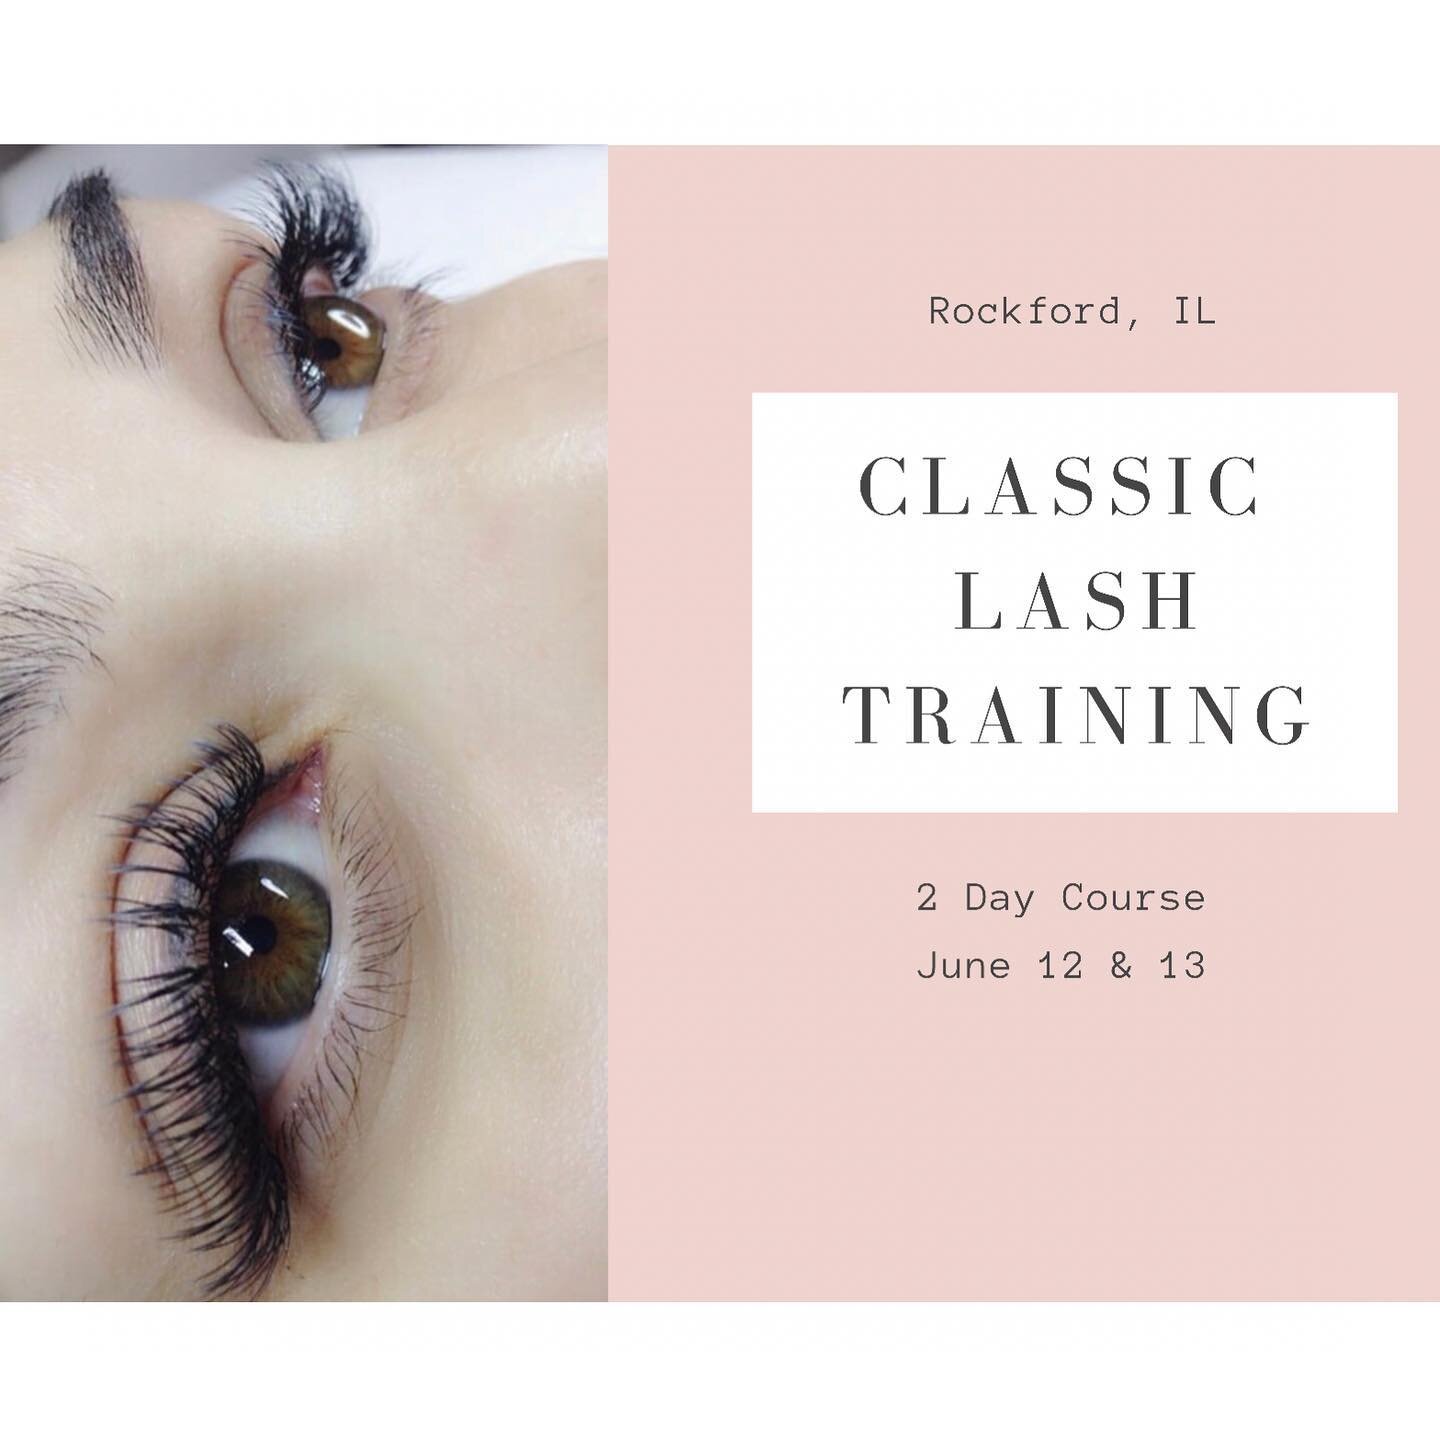 𝗖𝗹𝗮𝘀𝘀𝗶𝗰 𝗟𝗮𝘀𝗵 𝗧𝗿𝗮𝗶𝗻𝗶𝗻𝗴....

Is the foundation to lashing and designed to help you learn and understand the fundamentals of becoming a Lash Artist. 

𝐉𝐮𝐧𝐞 12 &amp;13 𝐢𝐬 𝐨𝐮𝐫 𝐧𝐞𝐱𝐭 2 𝐝𝐚𝐲 𝐋𝐚𝐬𝐡 𝐜𝐨𝐮𝐫𝐬𝐞!

DM, 📧 or